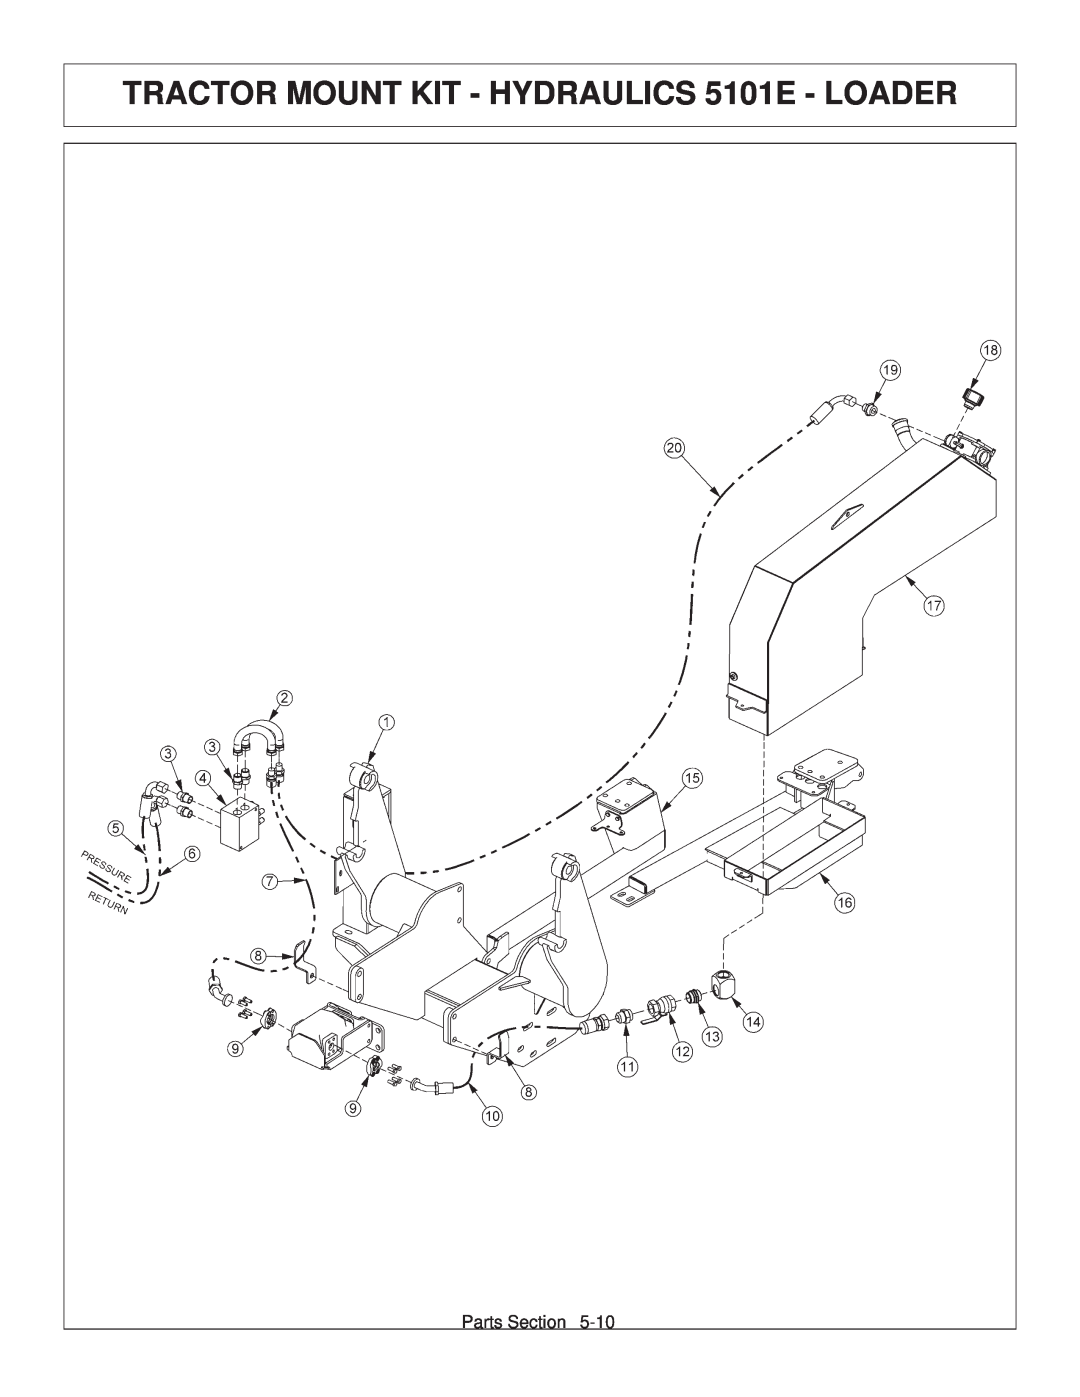 Tiger Products Co., Ltd JD 5101E, JD 5083E, JD 5093E manual TRACTOR MOUNT KIT - HYDRAULICS 5101E - LOADER, Parts Section 